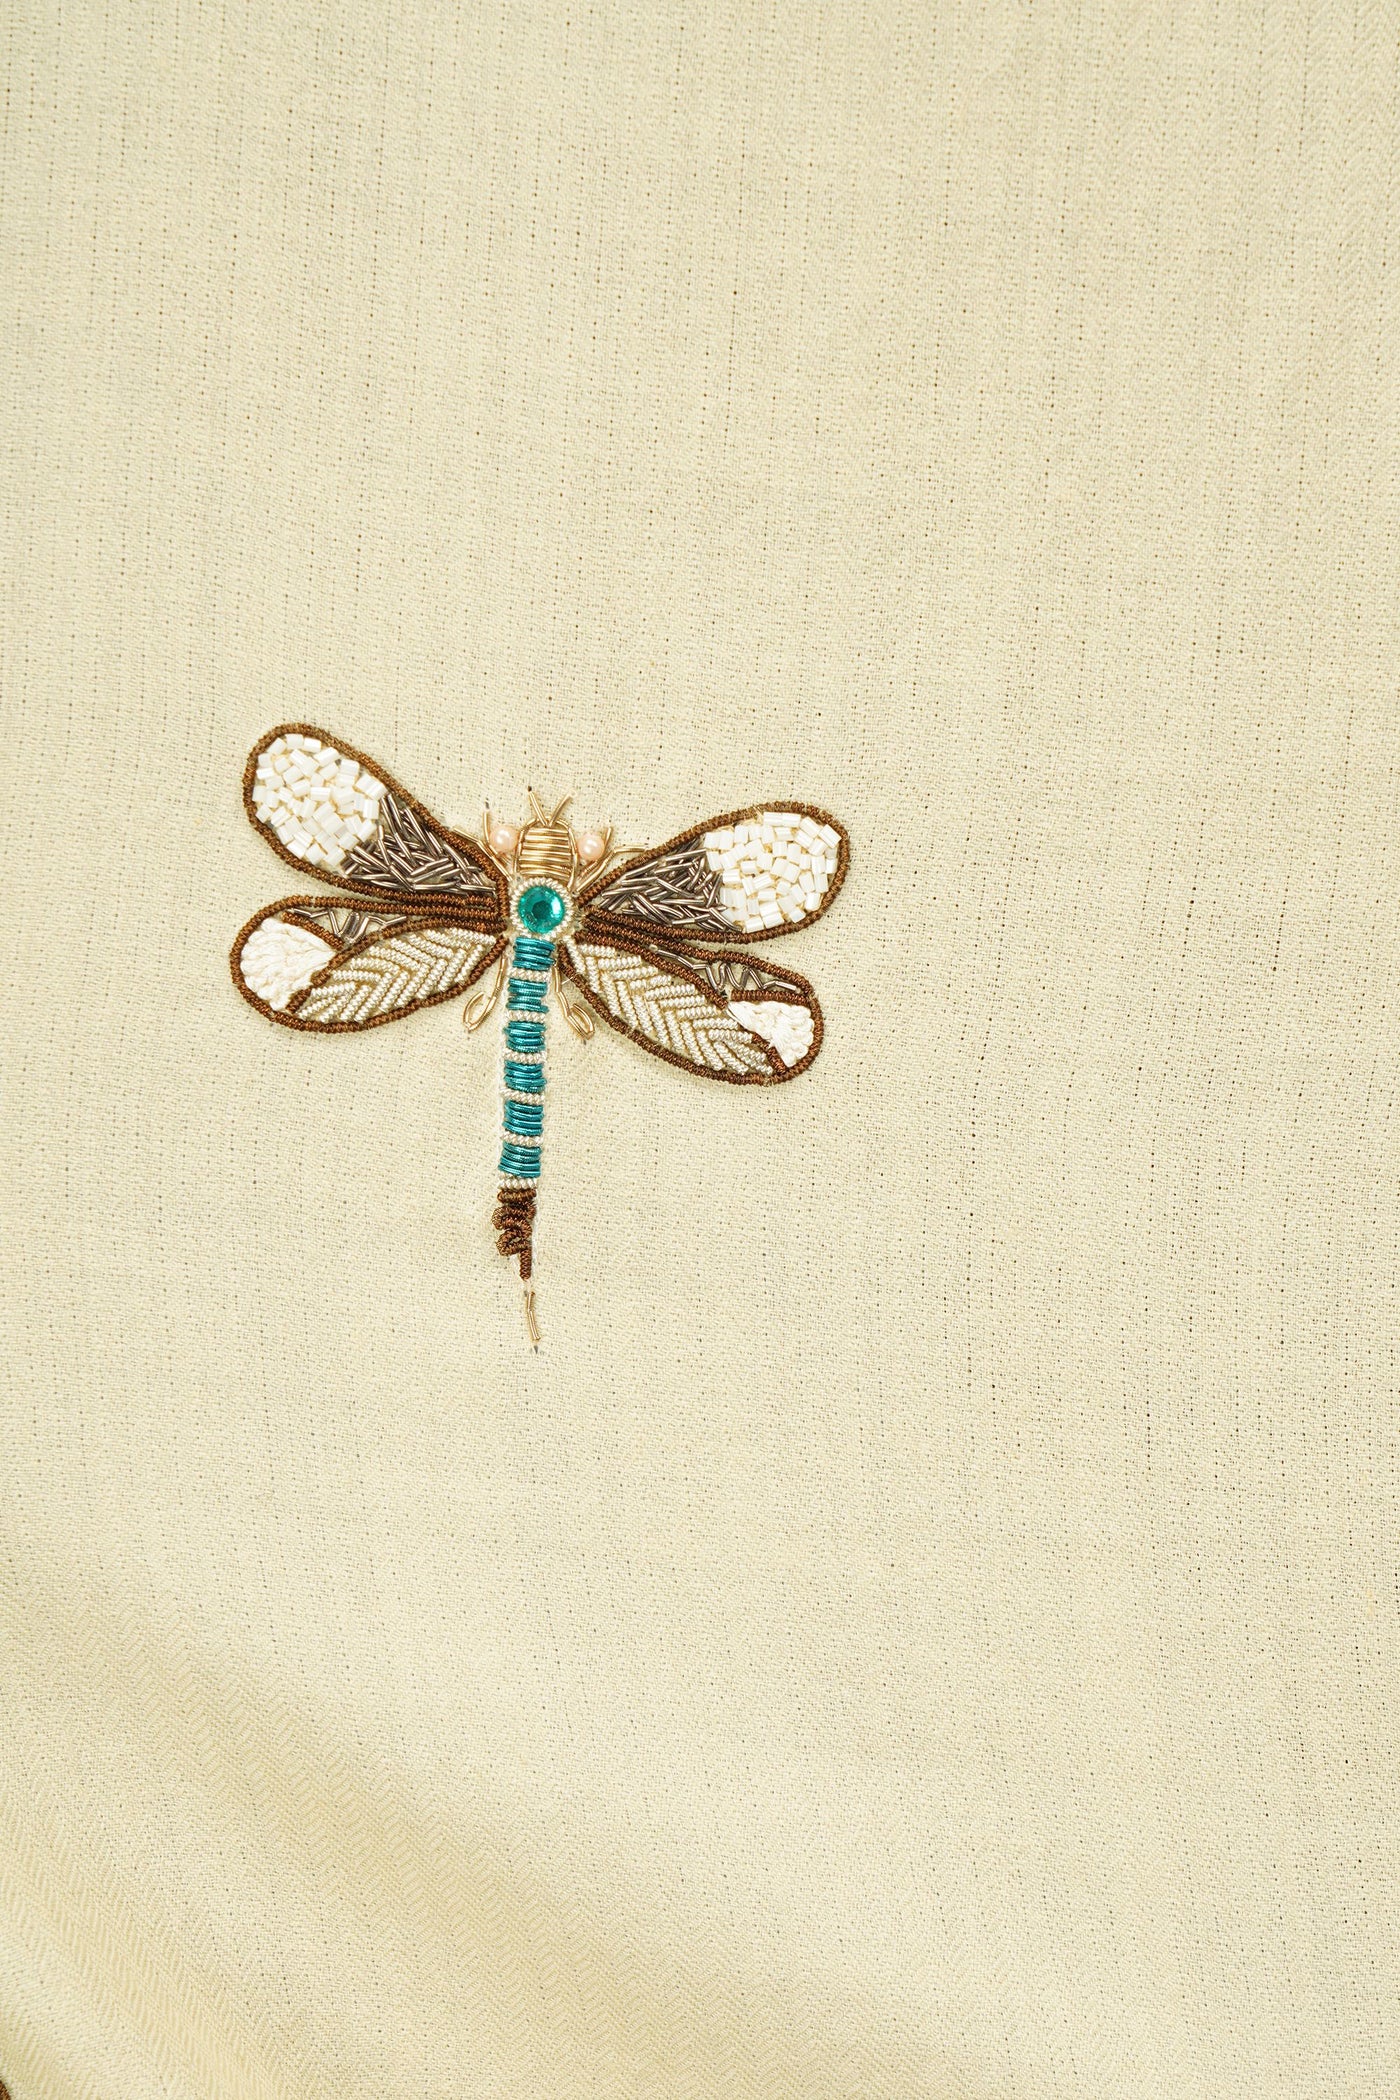 Cashmere Wool With Dragonfly Work Stole